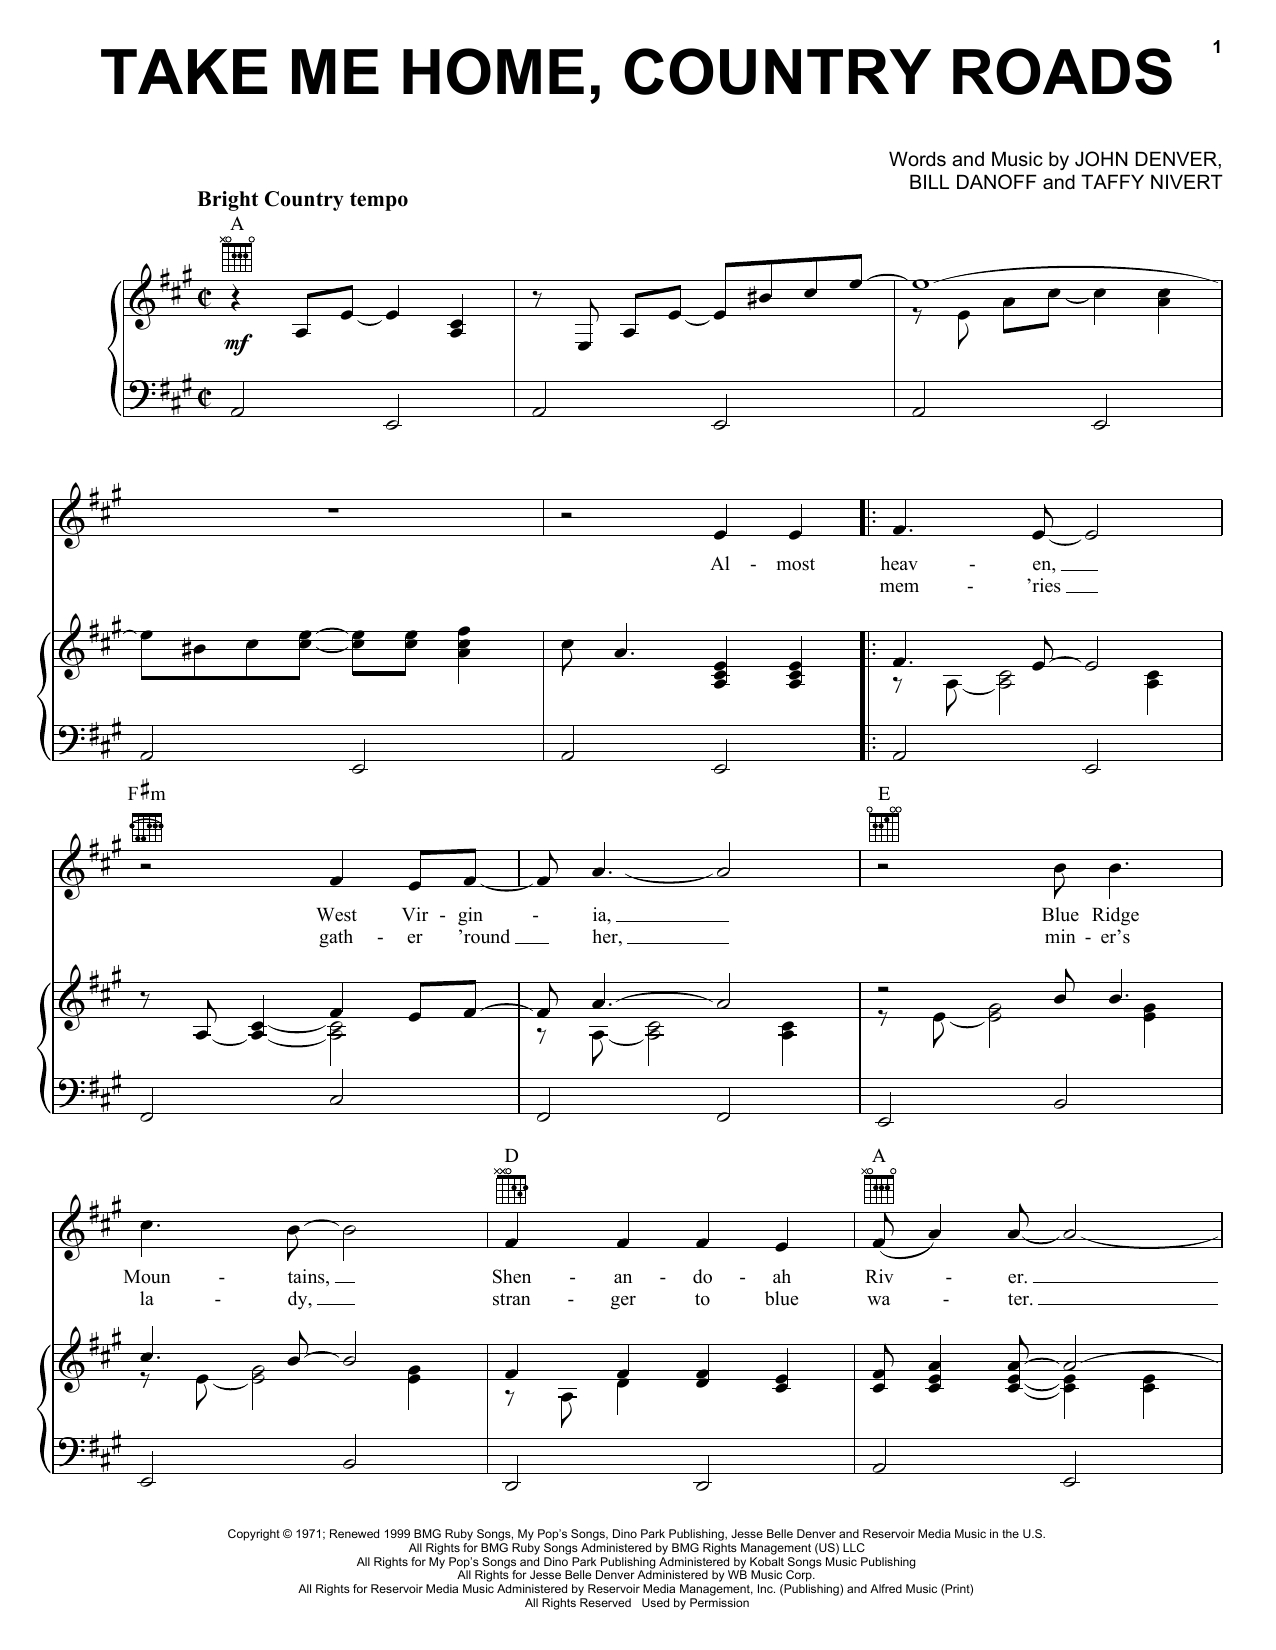 Country Roads Chords John Denver Take Me Home Country Roads Sheet Music Notes Chords Download Printable Harmonica Sku 198288